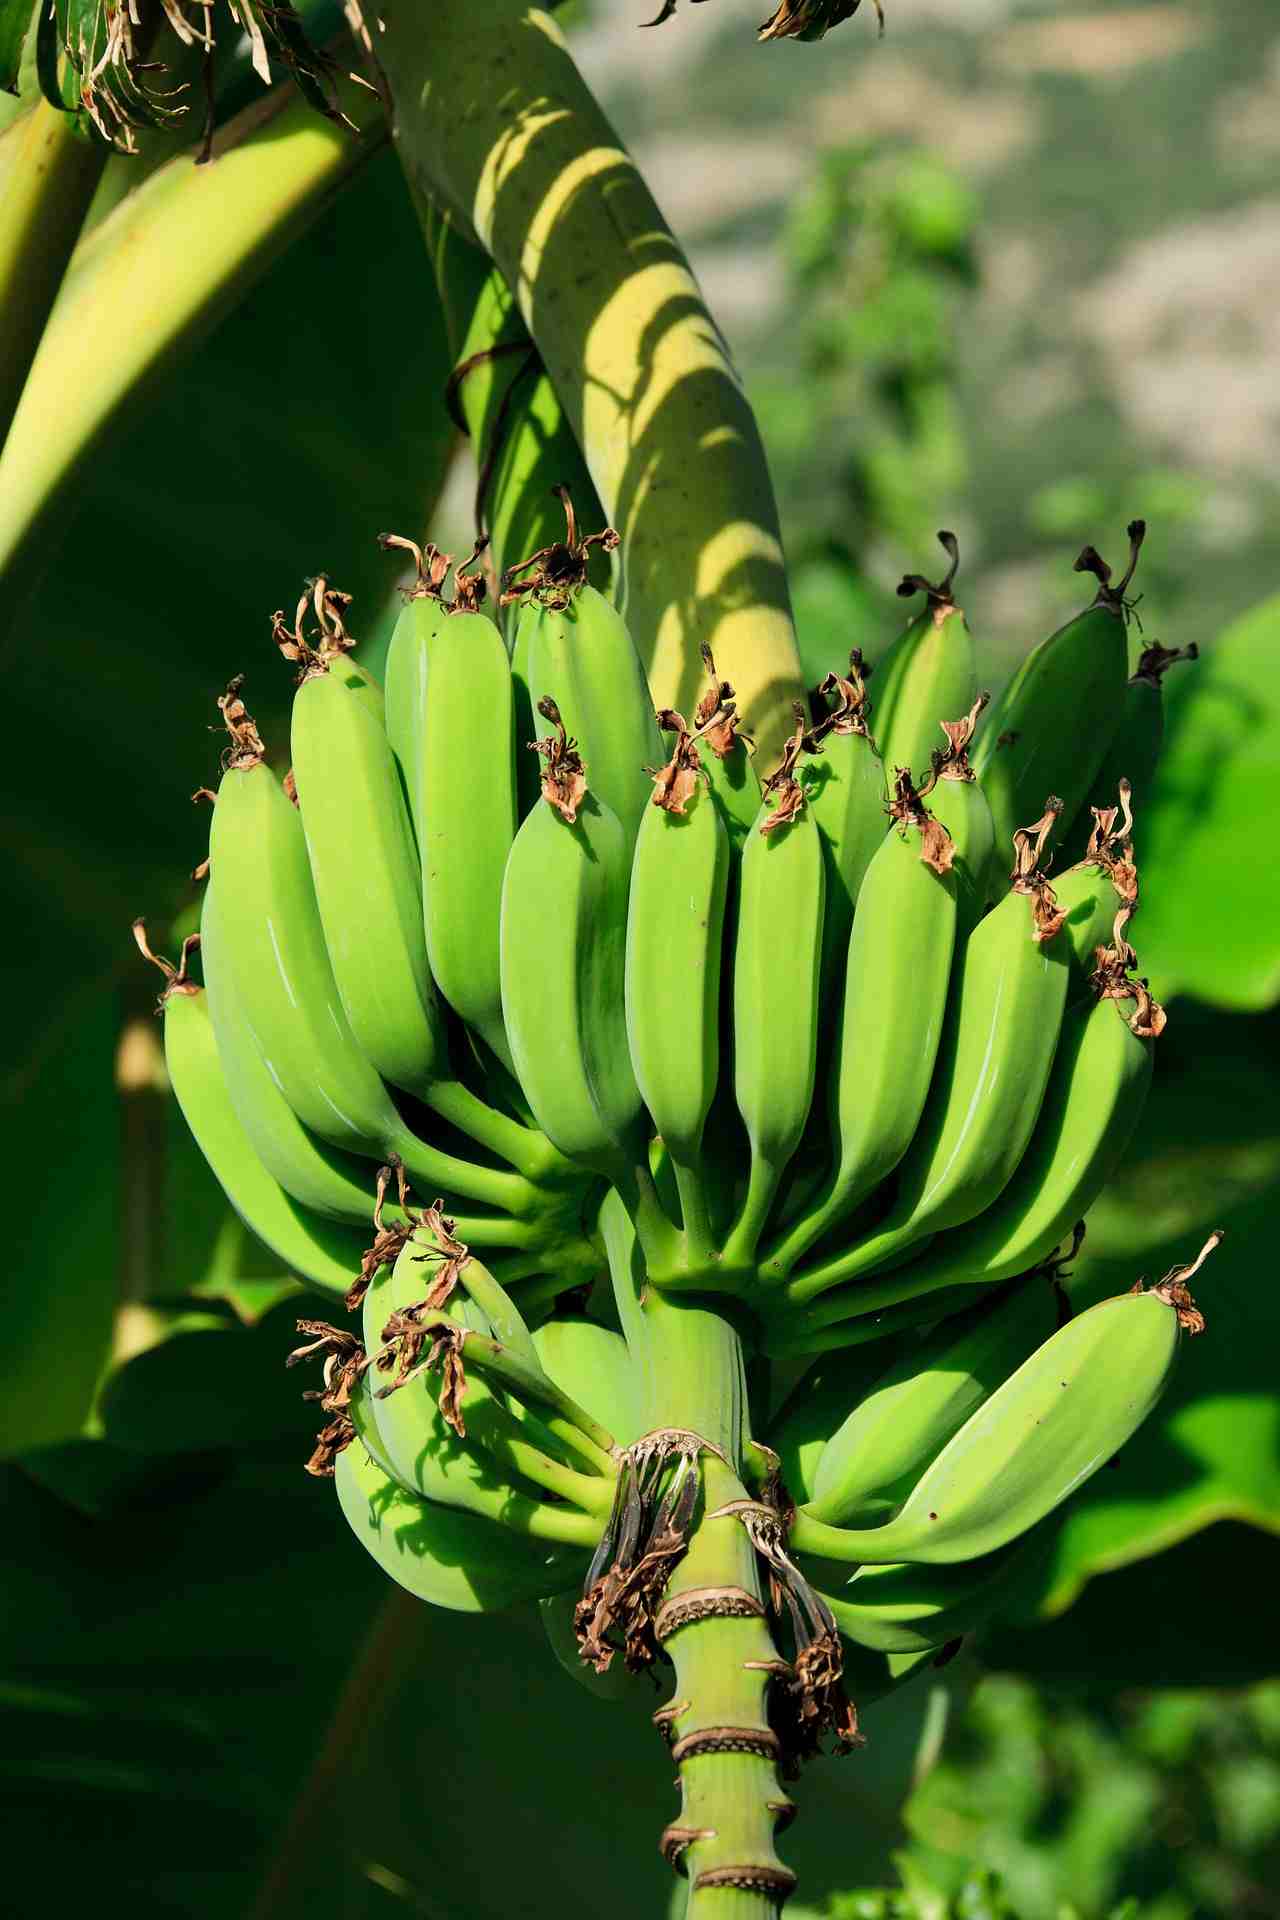 Horticulture Practices of Banana.